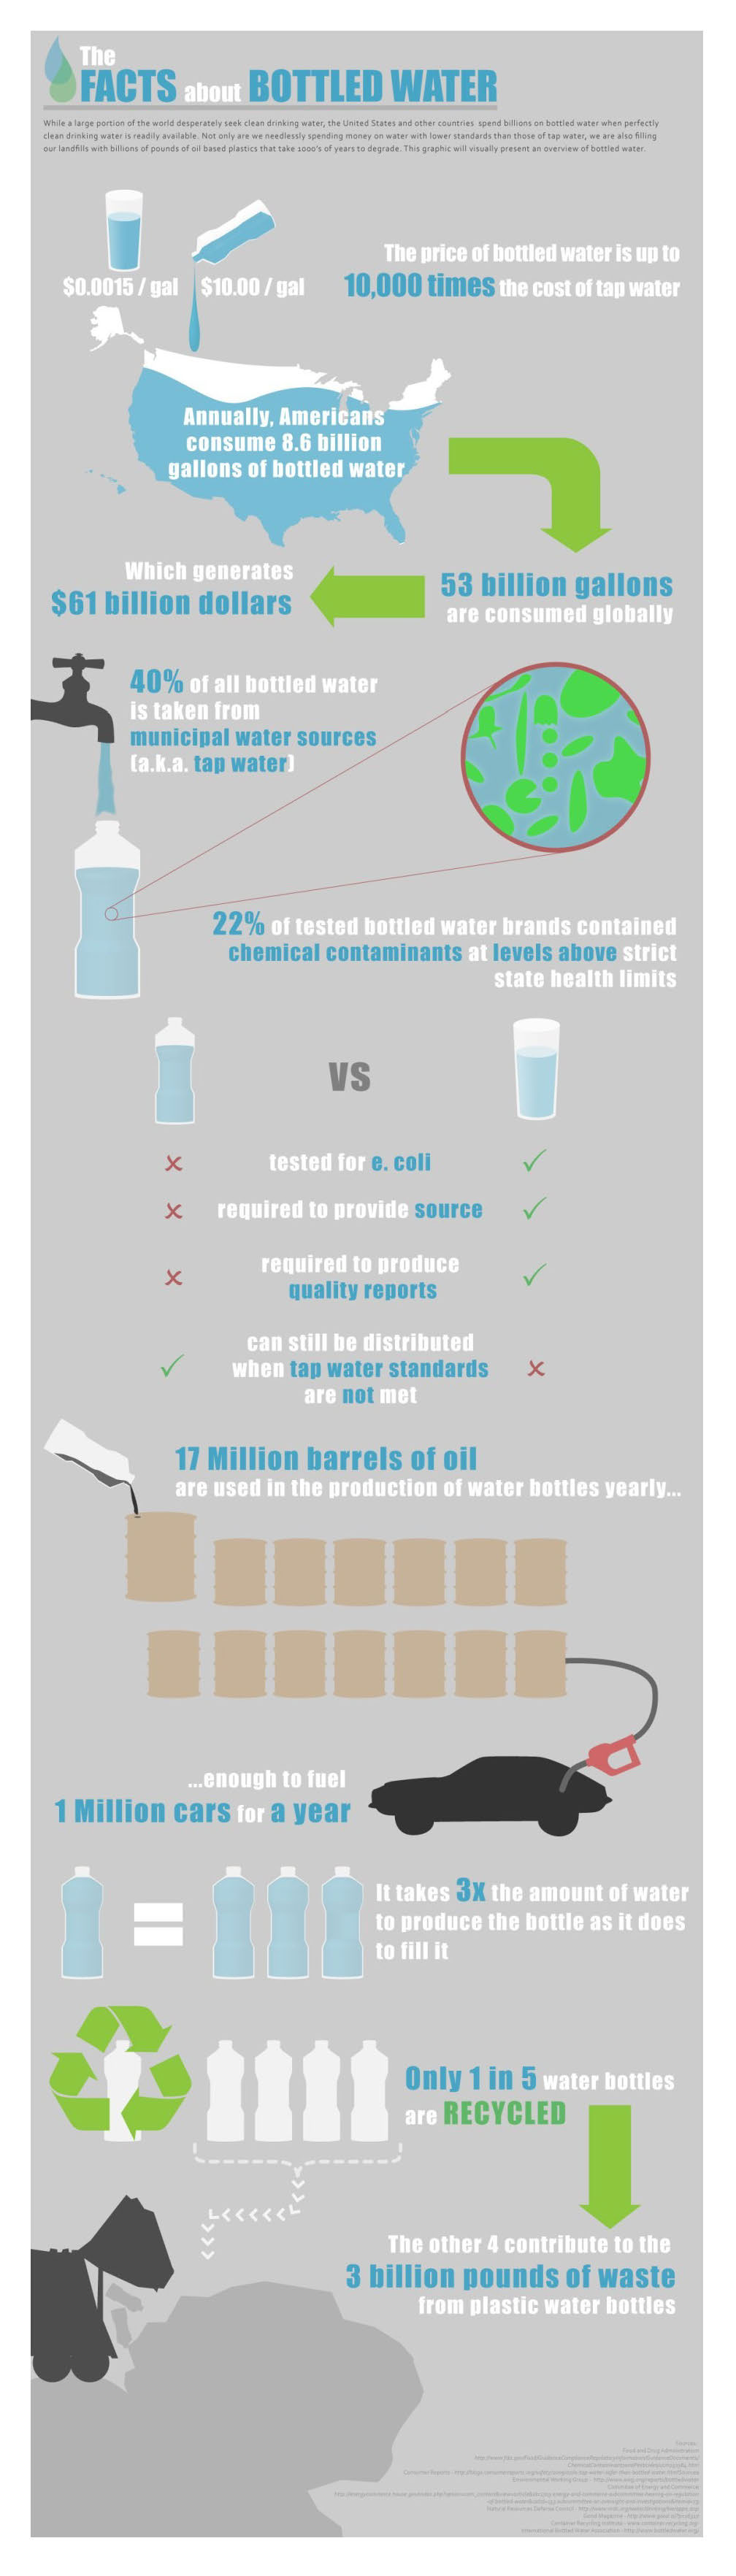 bottled water versus tap water facts